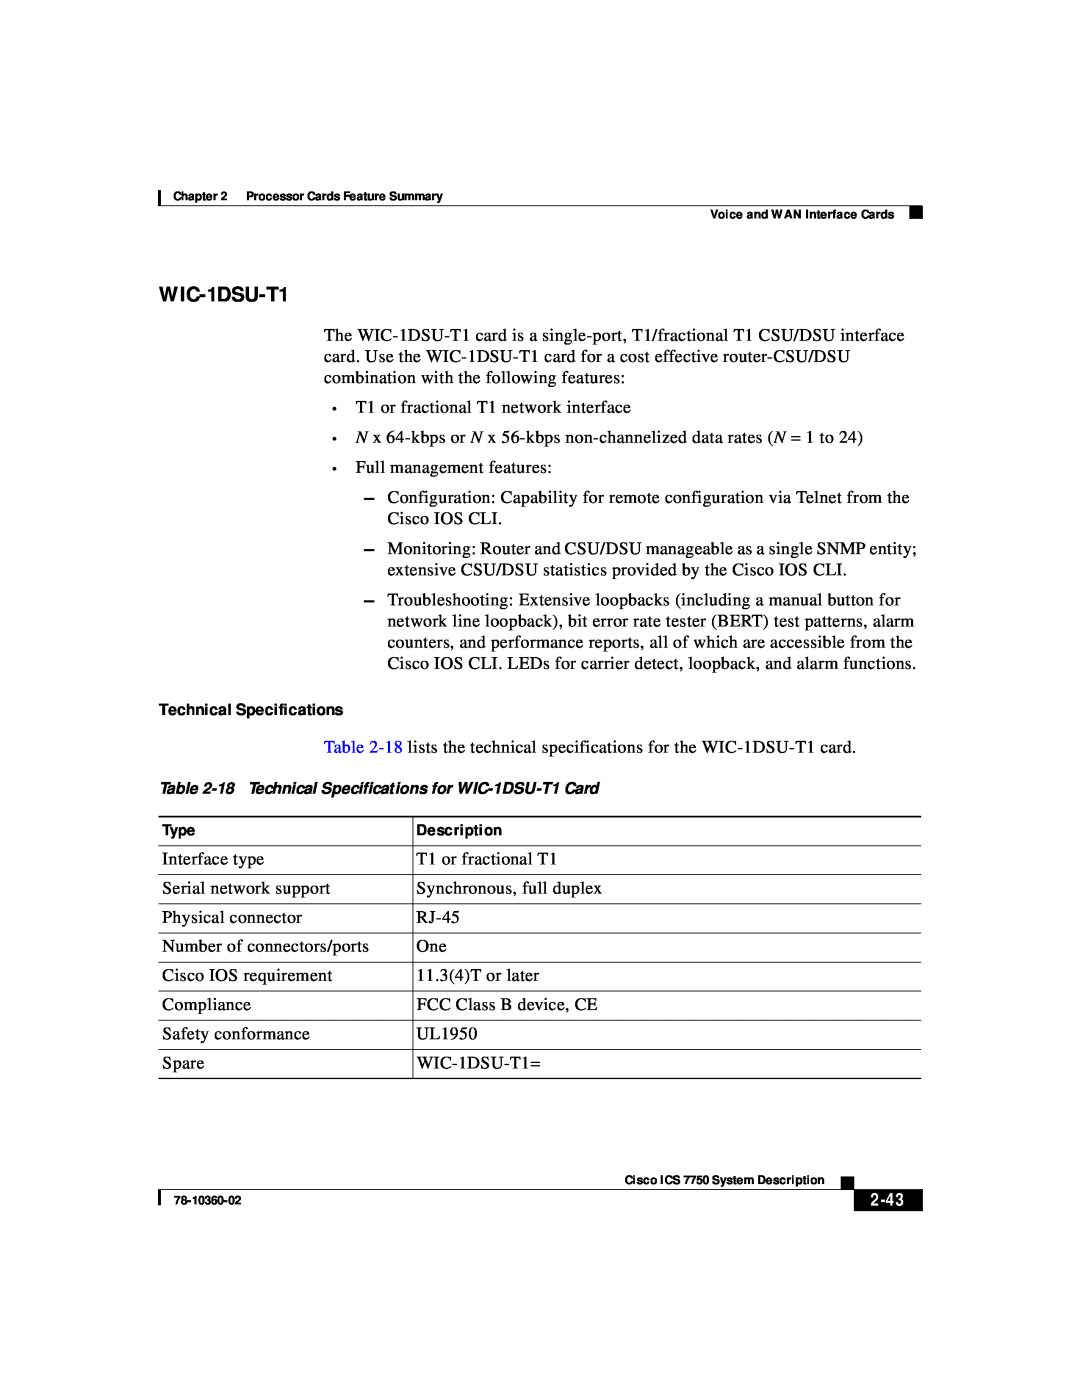 Cisco Systems ICS-7750 manual 2-43, 18 Technical Specifications for WIC-1DSU-T1 Card 